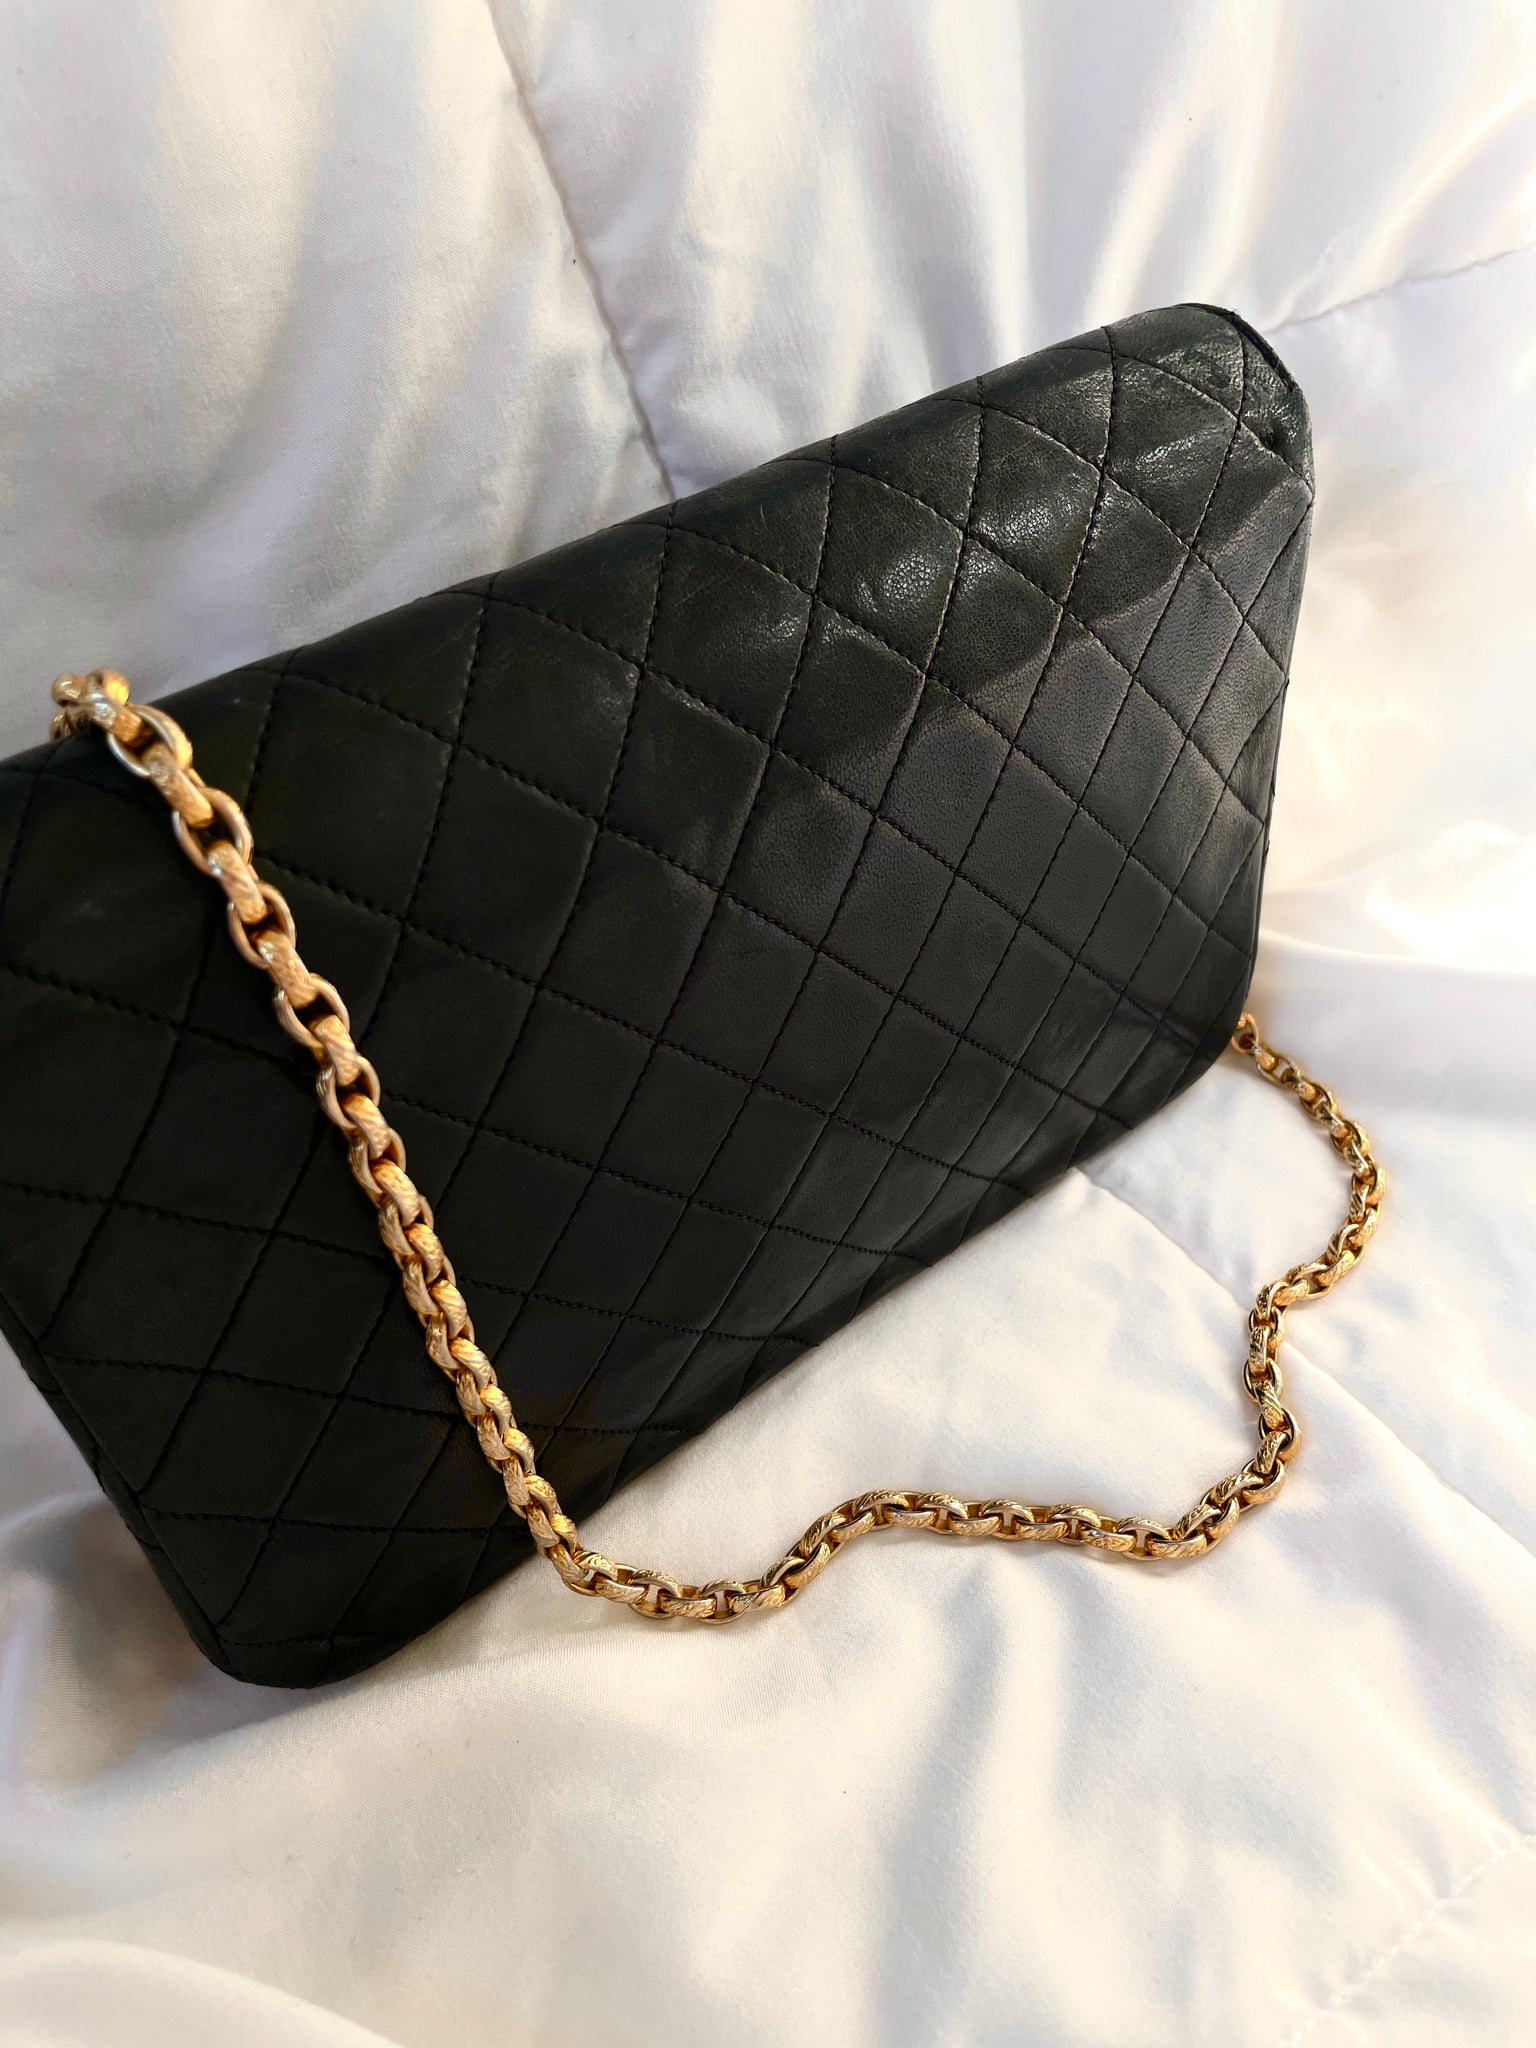 chanel black purse with gold chain used